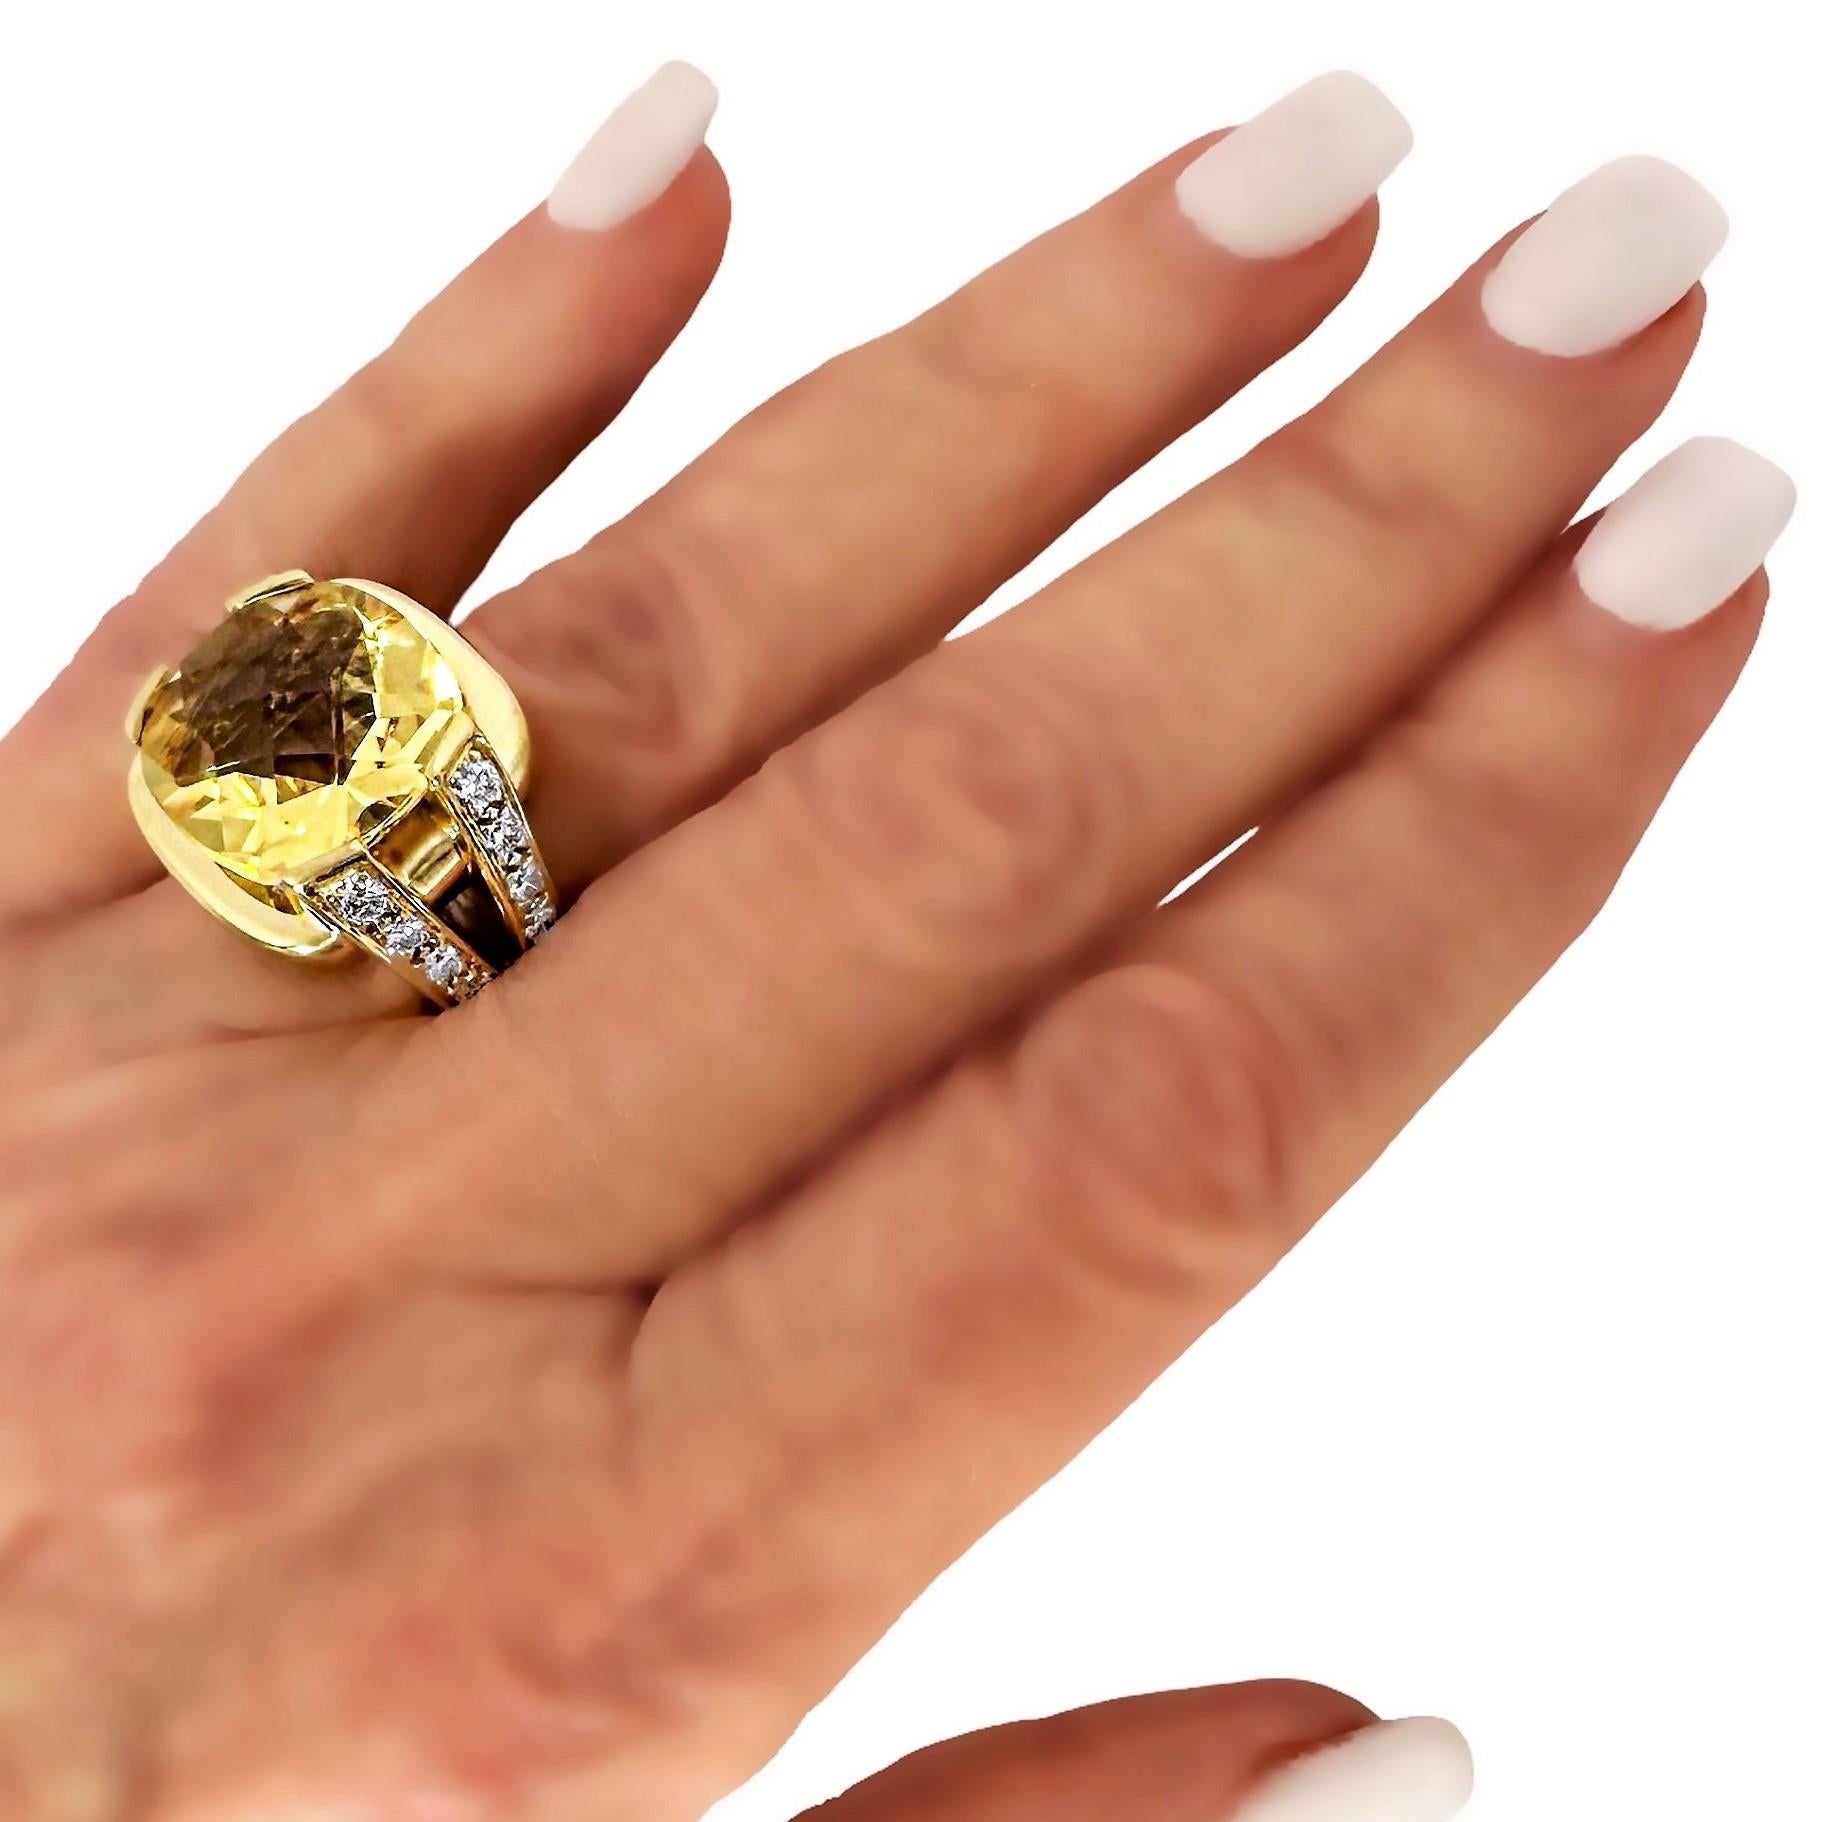 Very Dramatic Late-20th Century 18k Gold, Citrine and Diamond Fashion Ring For Sale 2